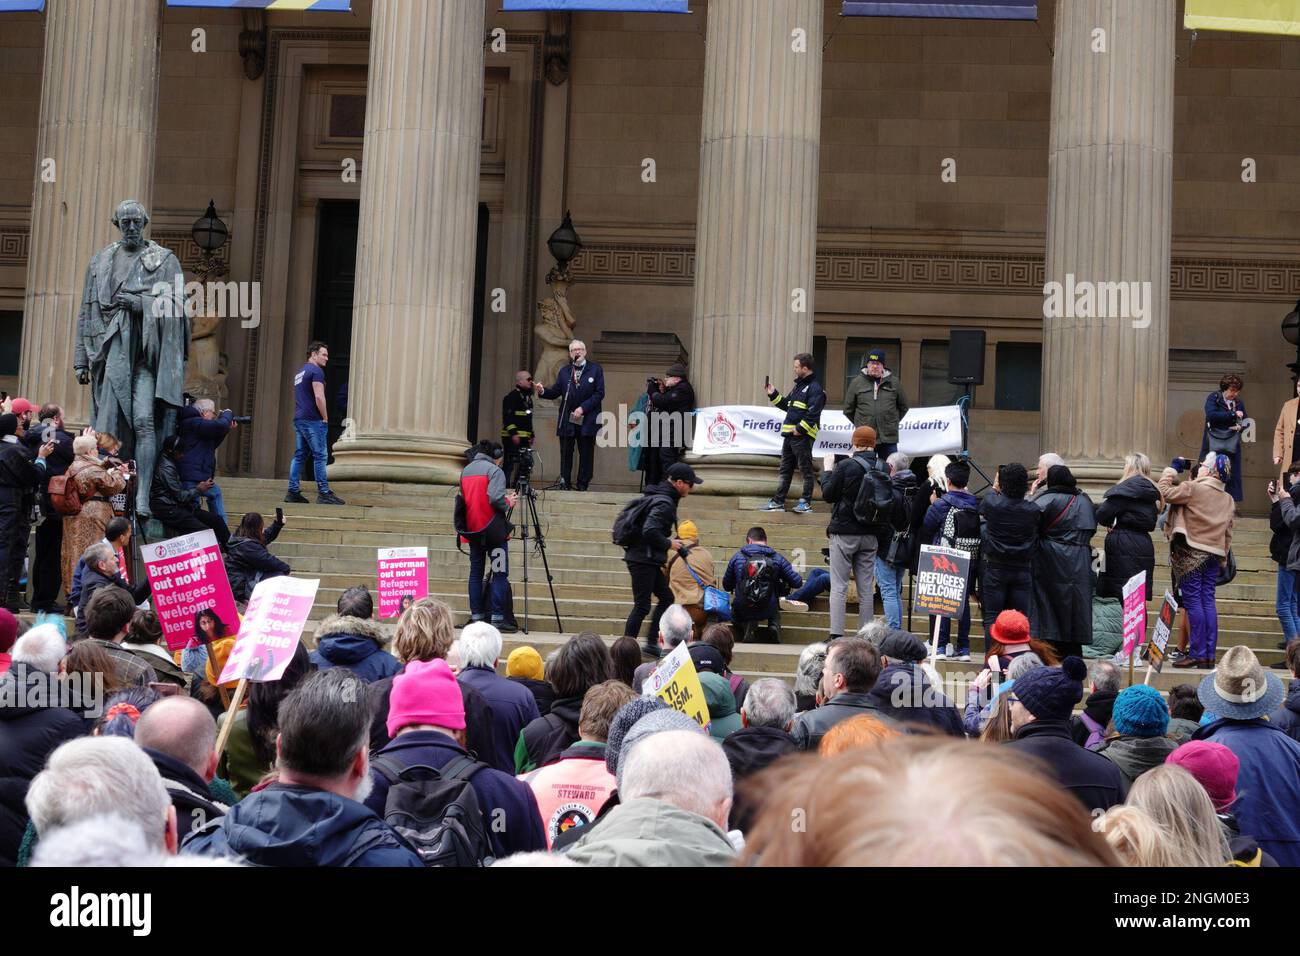 Liverpool, UK,18th February2023.  Jeremy Corbyn speaks at the 'Refugees Welcome Here' demonstration at St George's Hall Liverpool at 12pm on Saturday, February 18th. It comes after fireworks were launched at police and a police van was set on fire during a protest outside the Suites Hotel in Kirkby on Friday, February 10th. Organisers have announced former Labour leader Jeremy Corbyn as a speaker.  Hundreds of people have signed a petition condemning attempts to divide communities and 'to create fear and hatred' against people seeking refuge in the UK. Credit: Ken Biggs/Alamy Live News. Stock Photo